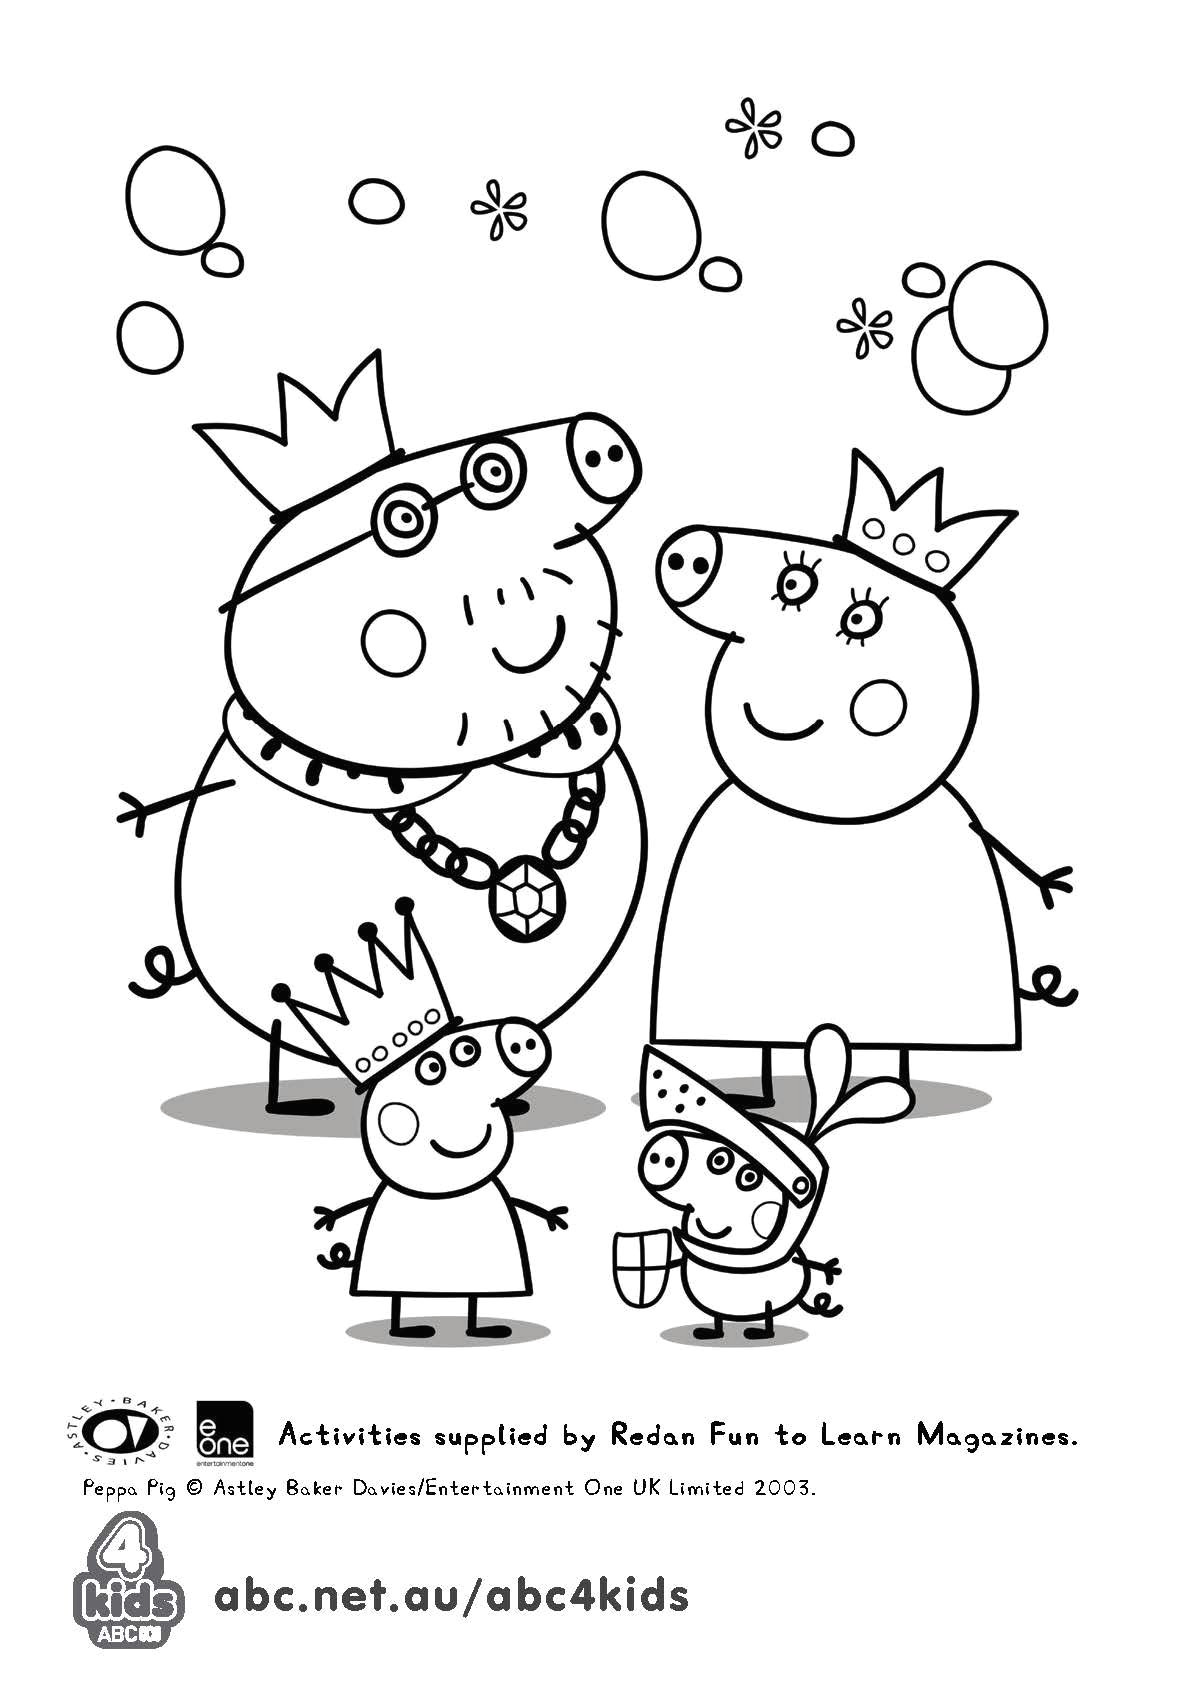 Peppa Pig Drawing 4 Eyes Pin by Piafkapin On Coloring Pages Pinterest Peppa Pig Coloring